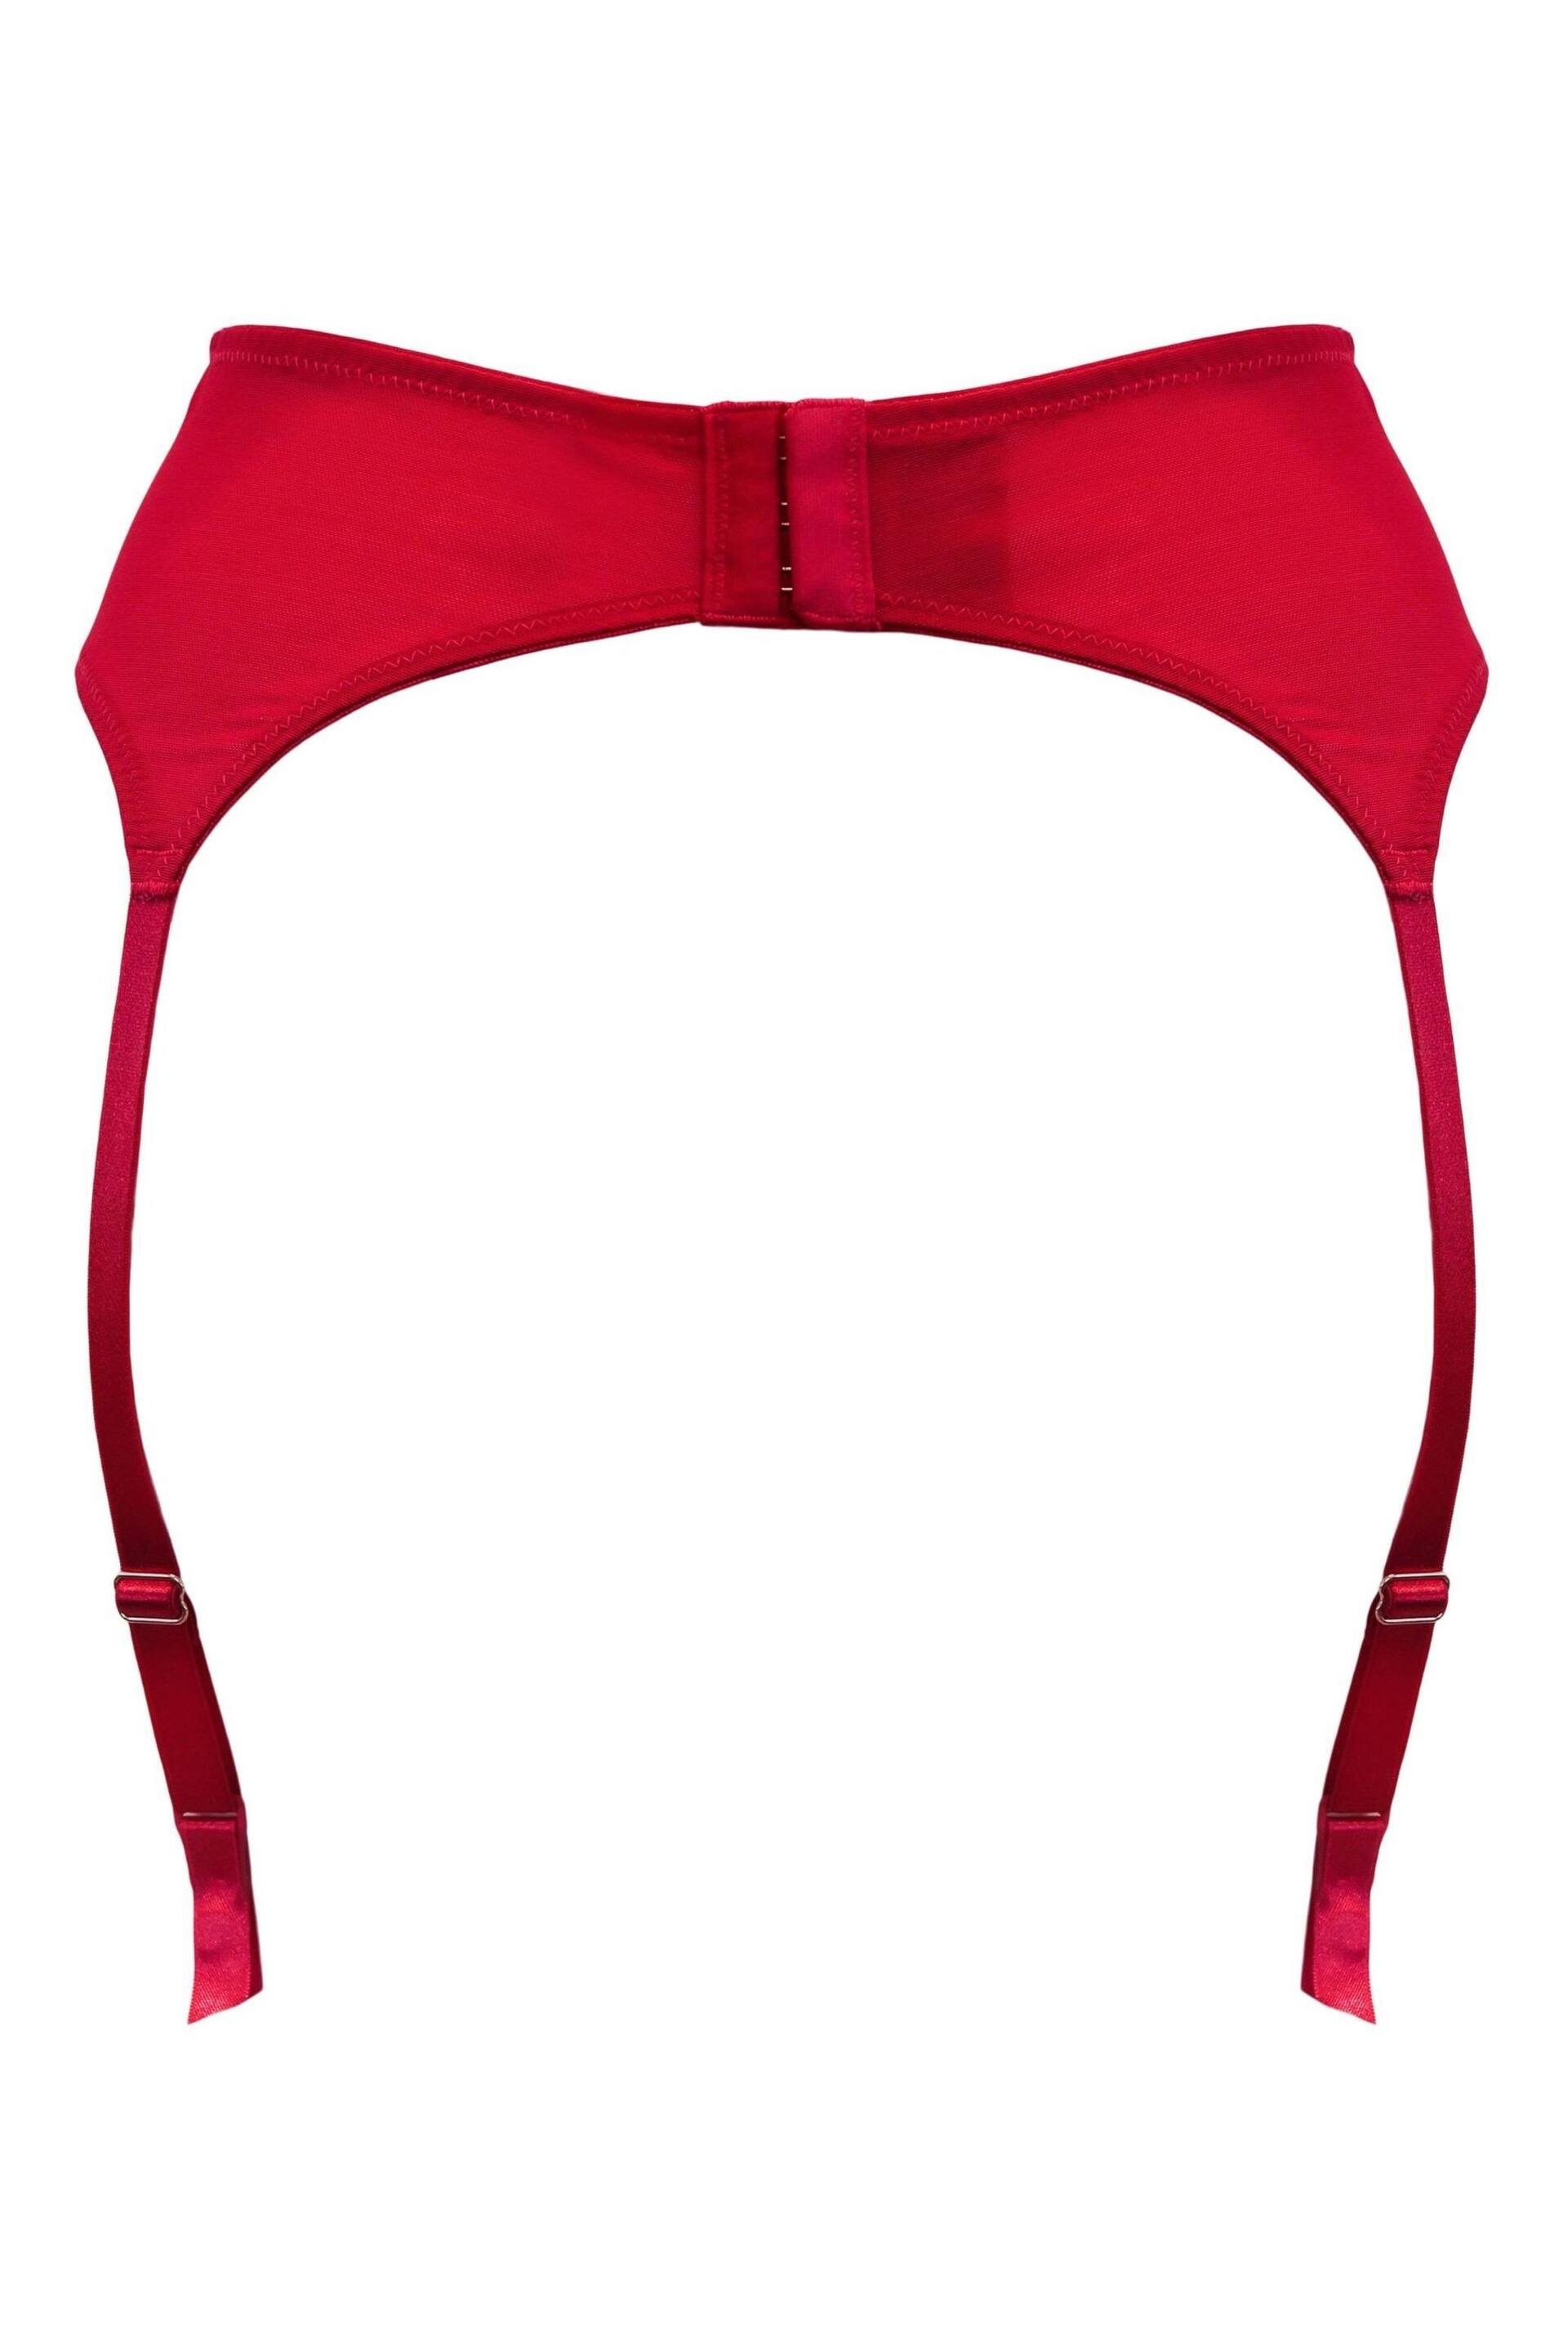 Pour Moi Red Roxie Suspender - Image 4 of 4